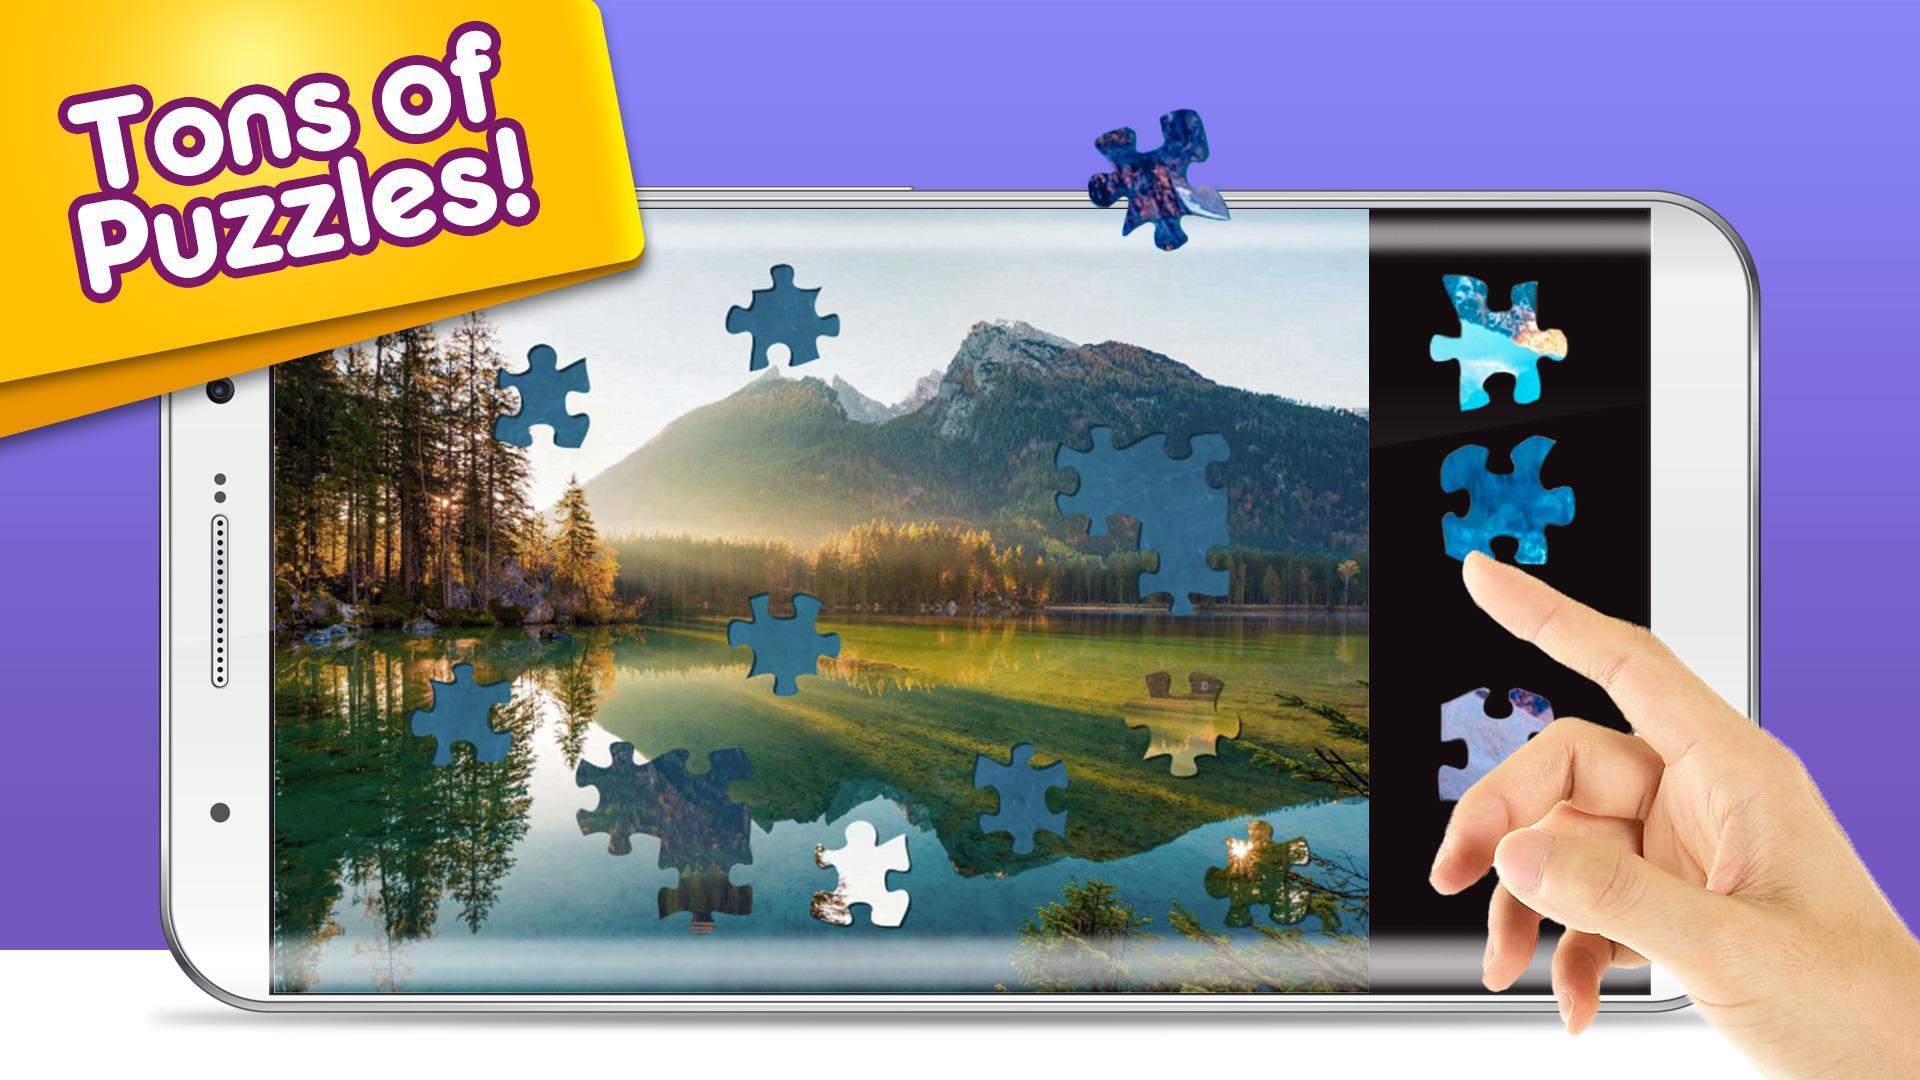 Screenshot 1 of Jigsaw Puzzle - Lustiges Puzzlespiel 0.5